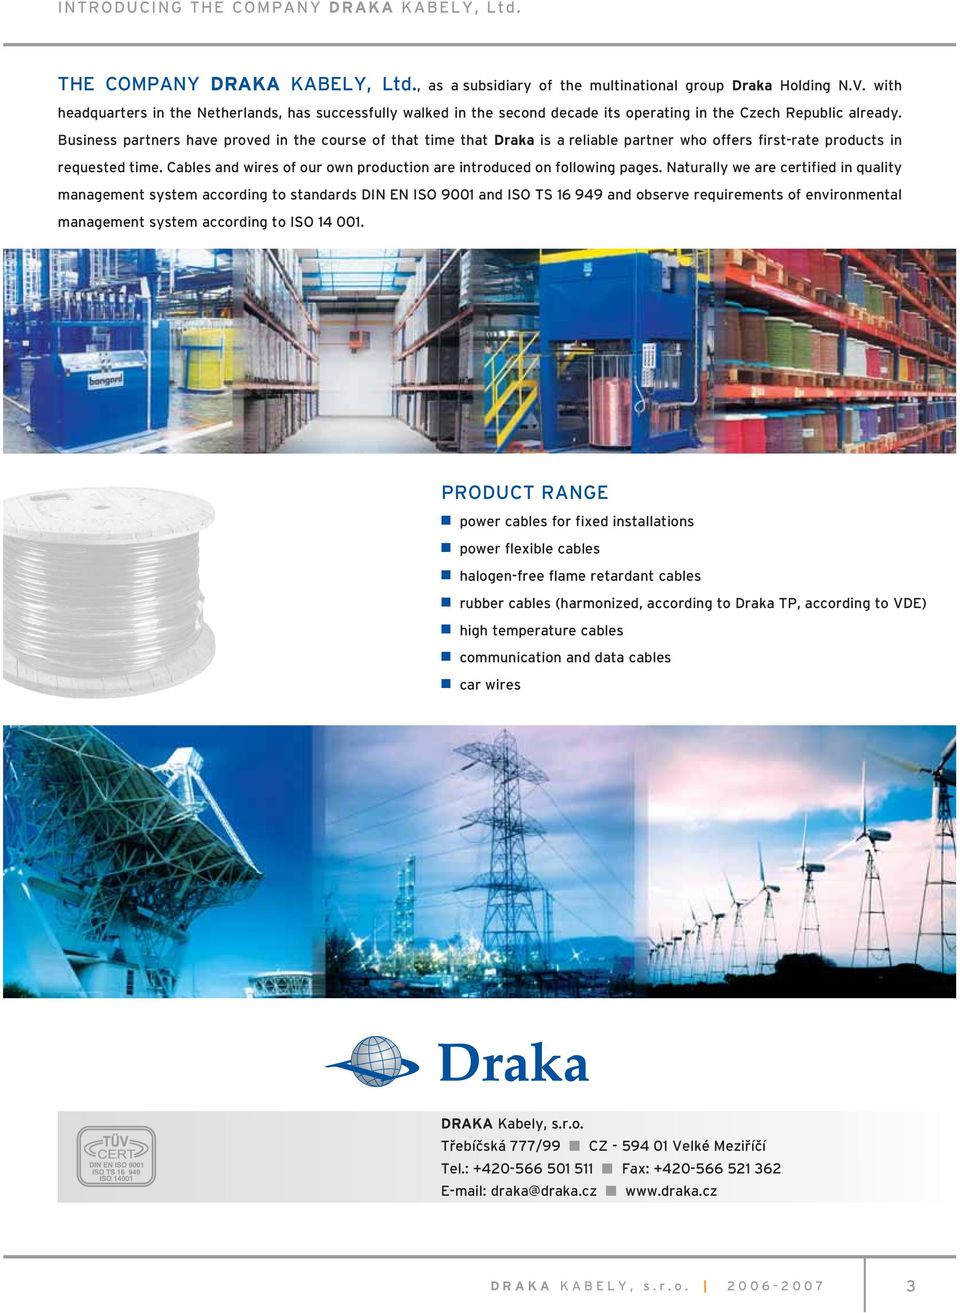 Business partners have proved in the course of that time that Draka is a reliable partner who offers first-rate products in requested time.